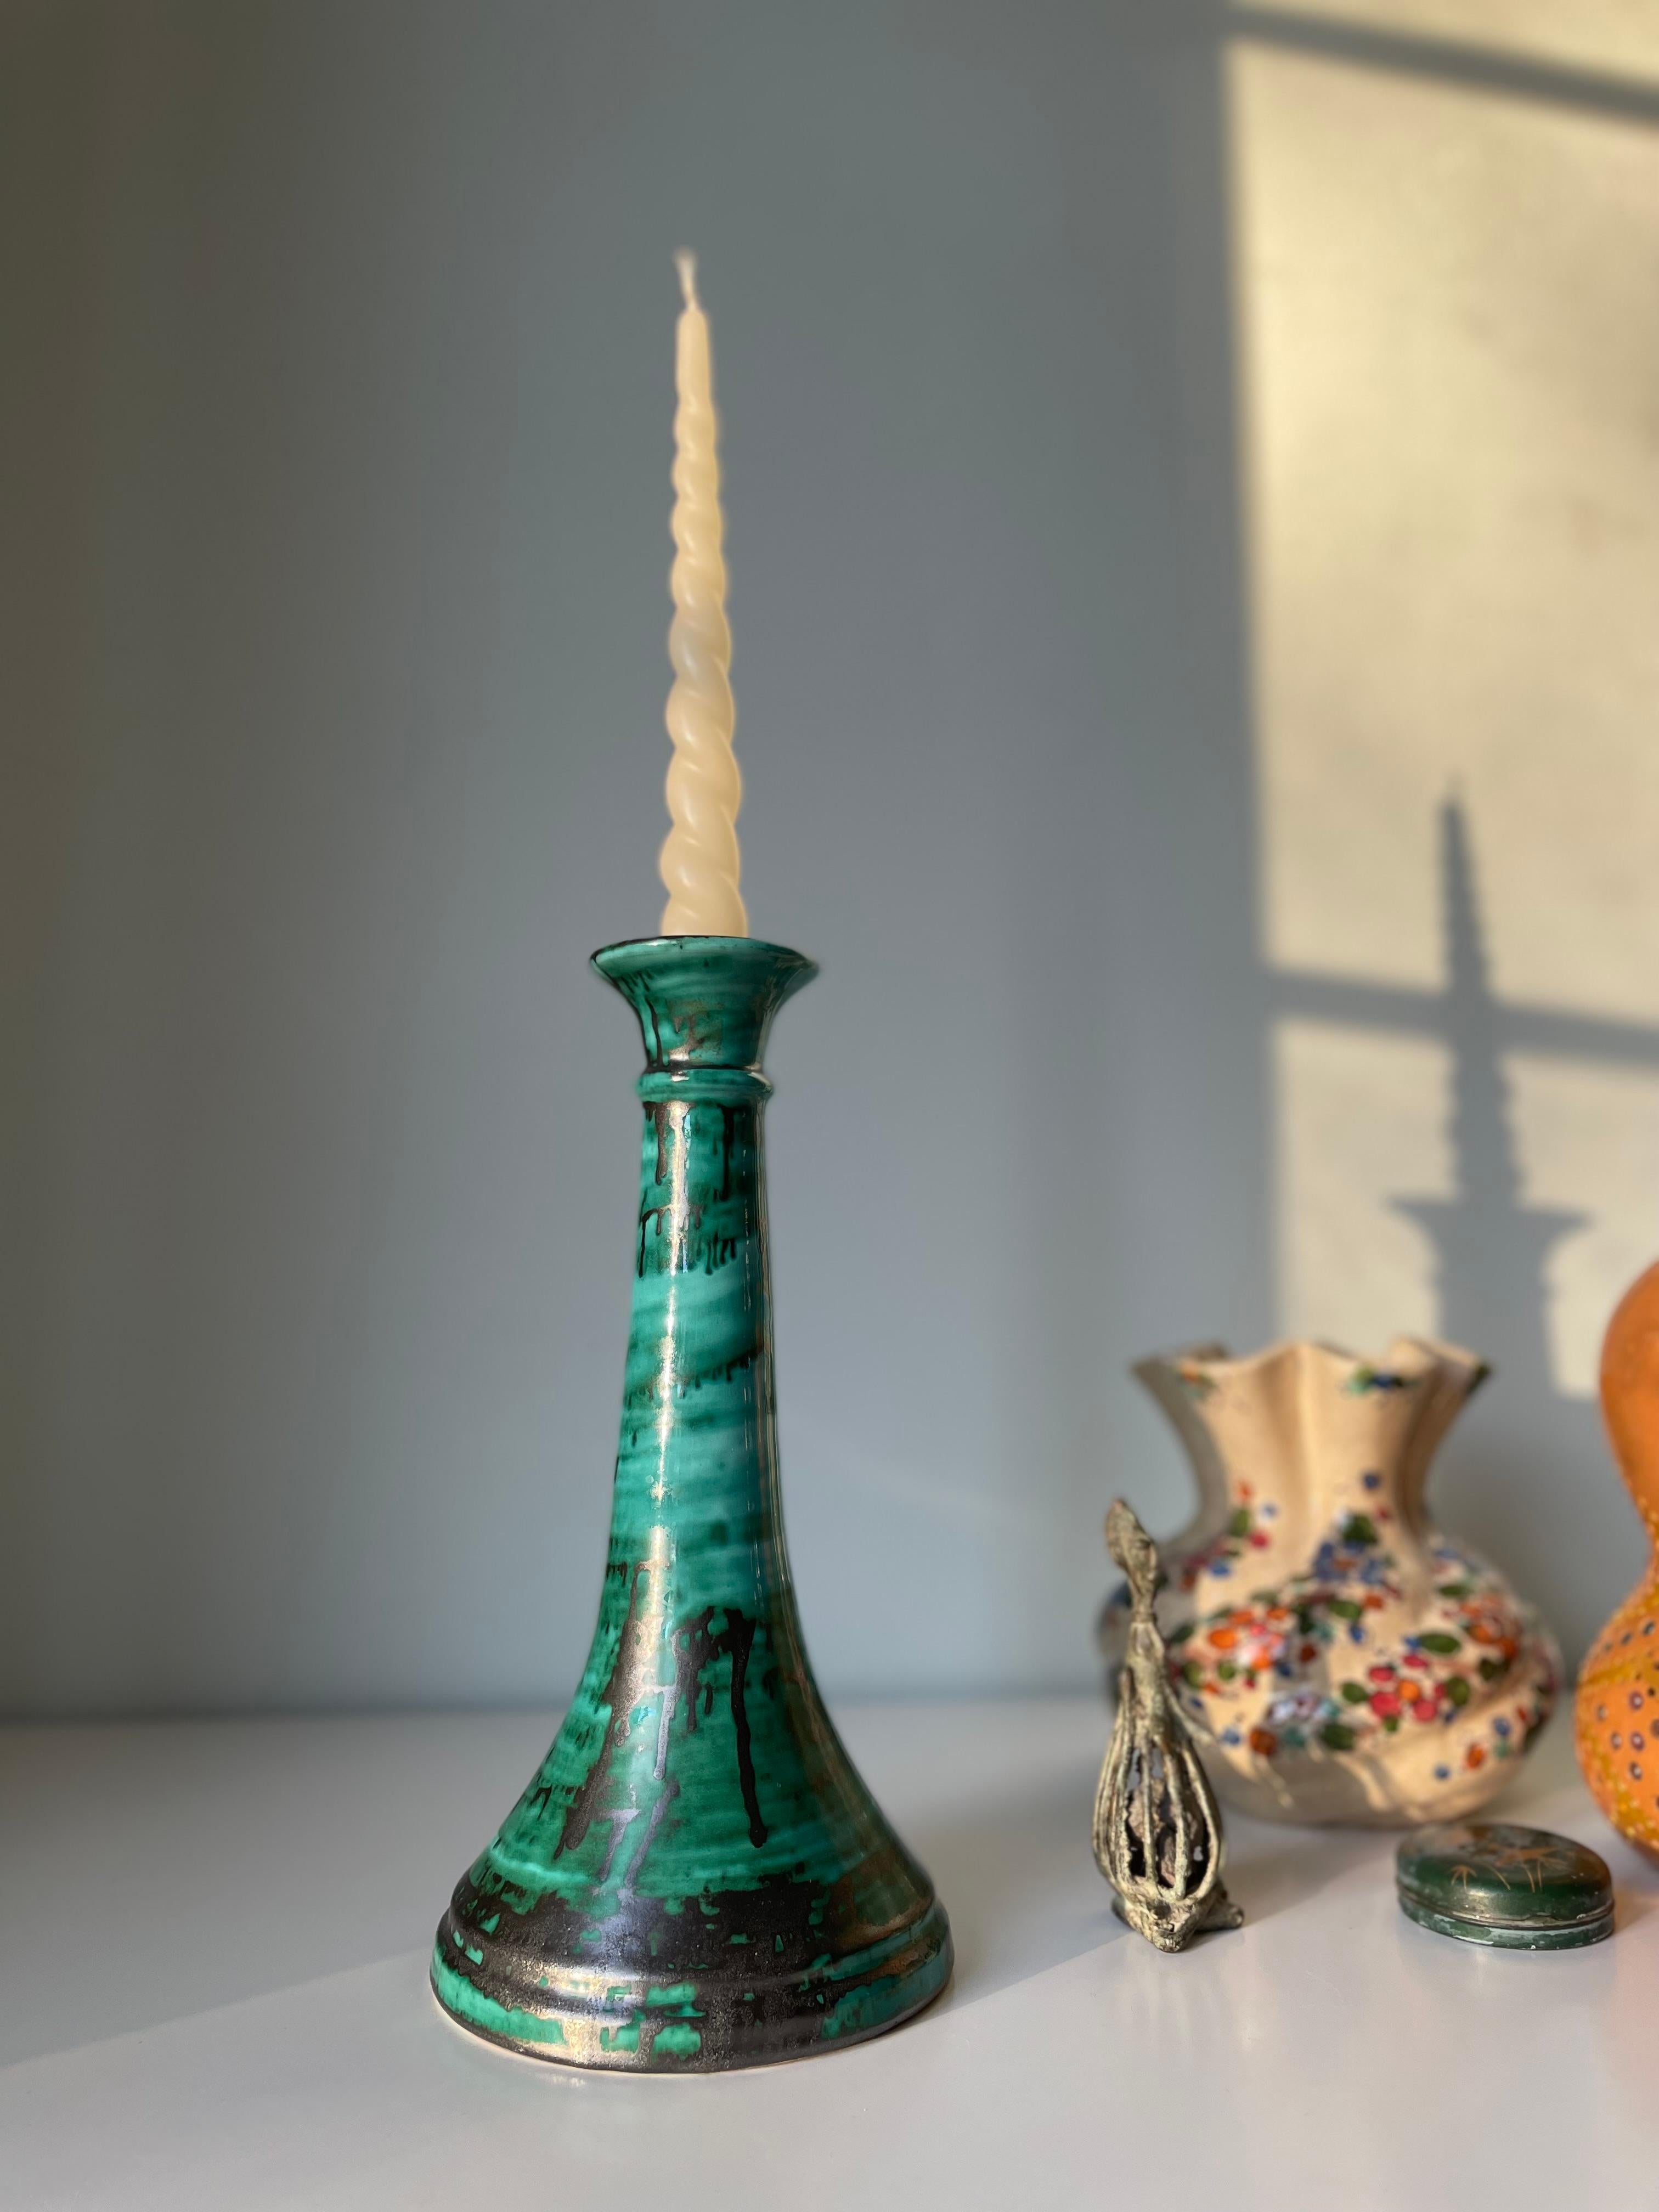 Large handmade Scandinavian modern bohemian style candle holder. Striking black and emerald green running glaze resembling the Moroccan Tamegroute pottery style in both color and shape. Designed and handmade in the late 1970s-early 1980s by Pernille